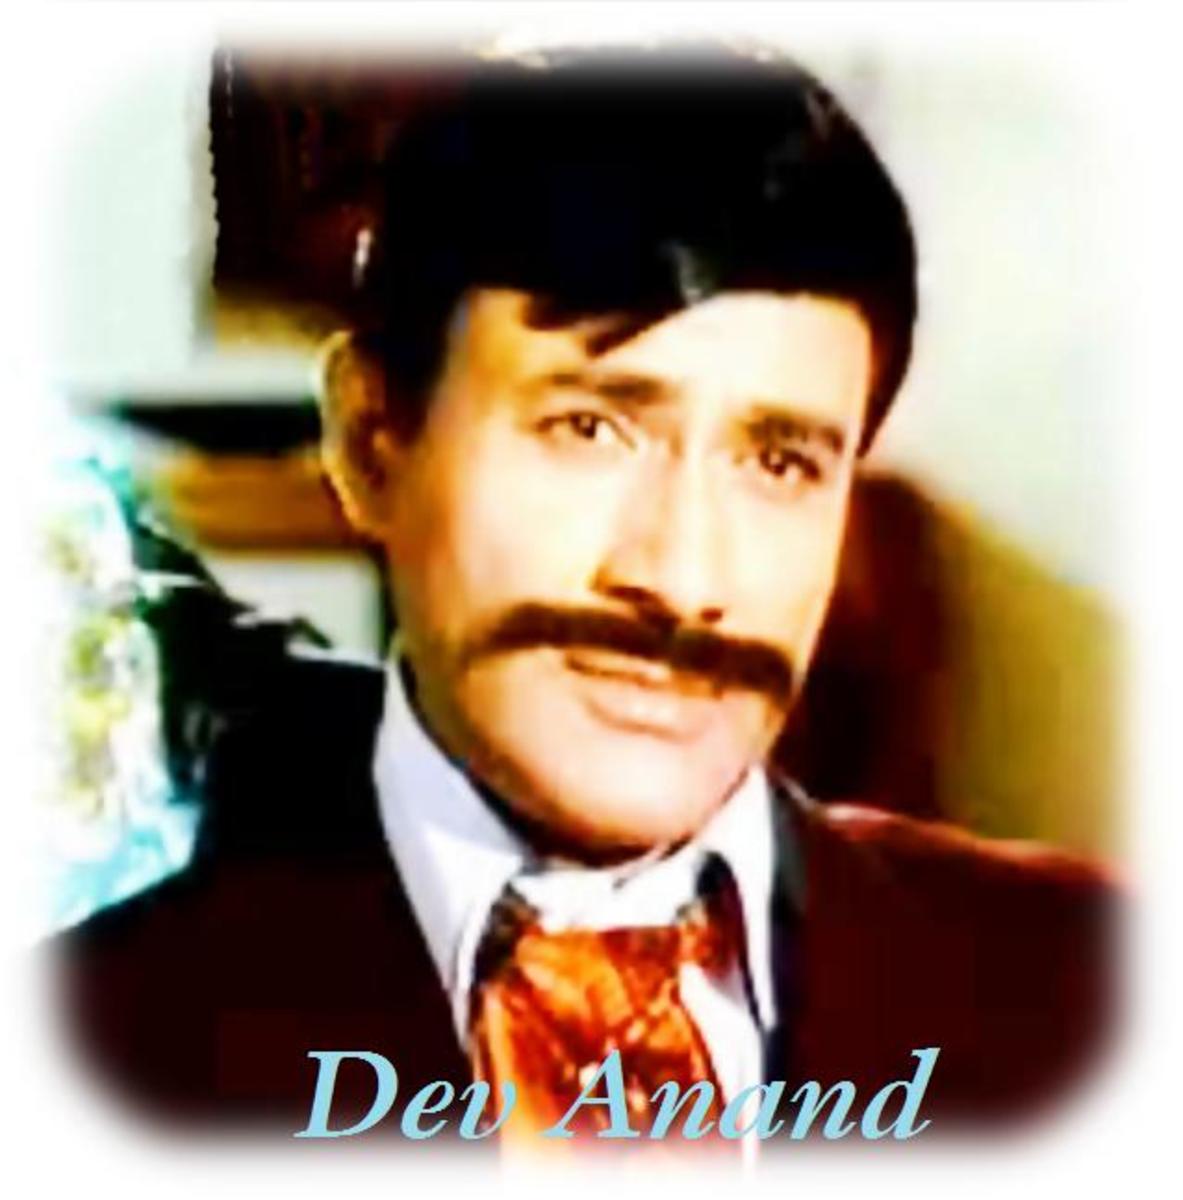 Dev Anand - The man who introduced, elaborated and mastered the art of romance in Bollywood